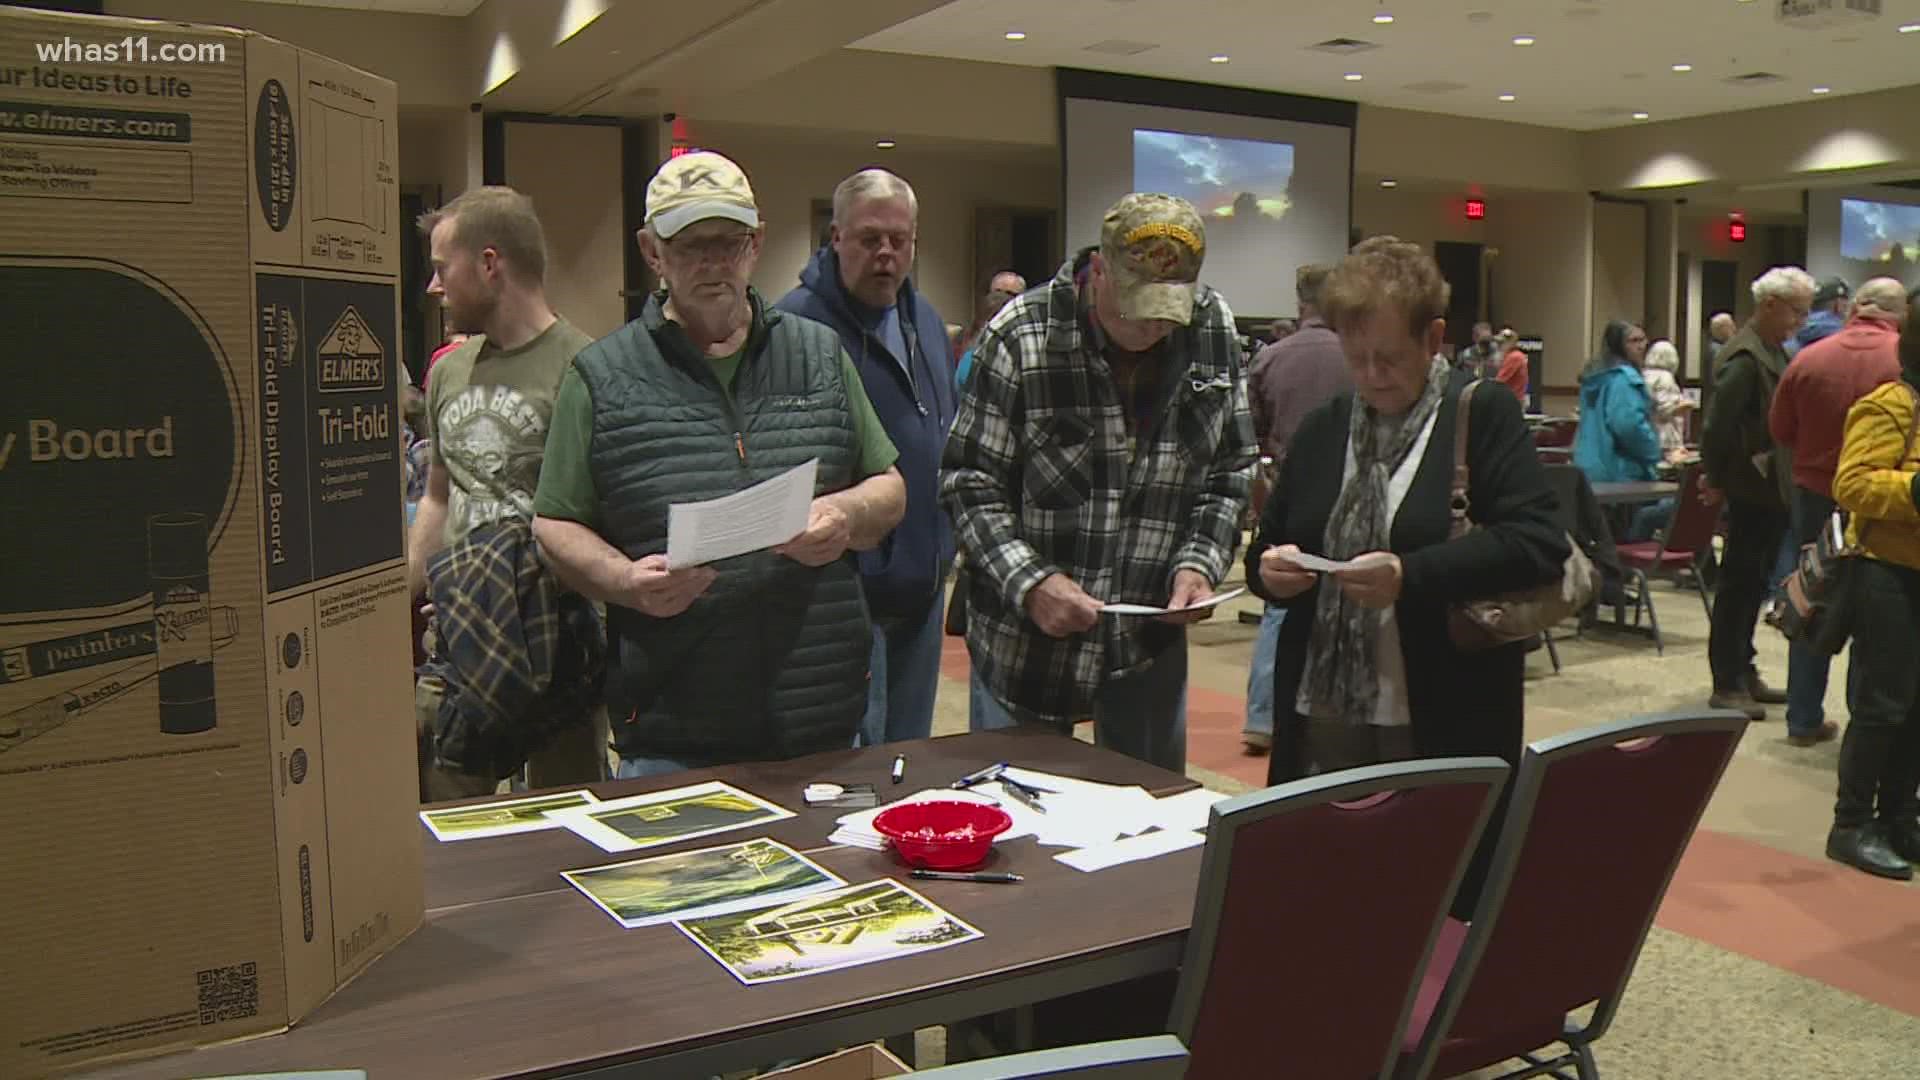 A group in Hardin County is fighting back against a proposed solar farm over concerns about what it will do to their farmland and local economy.